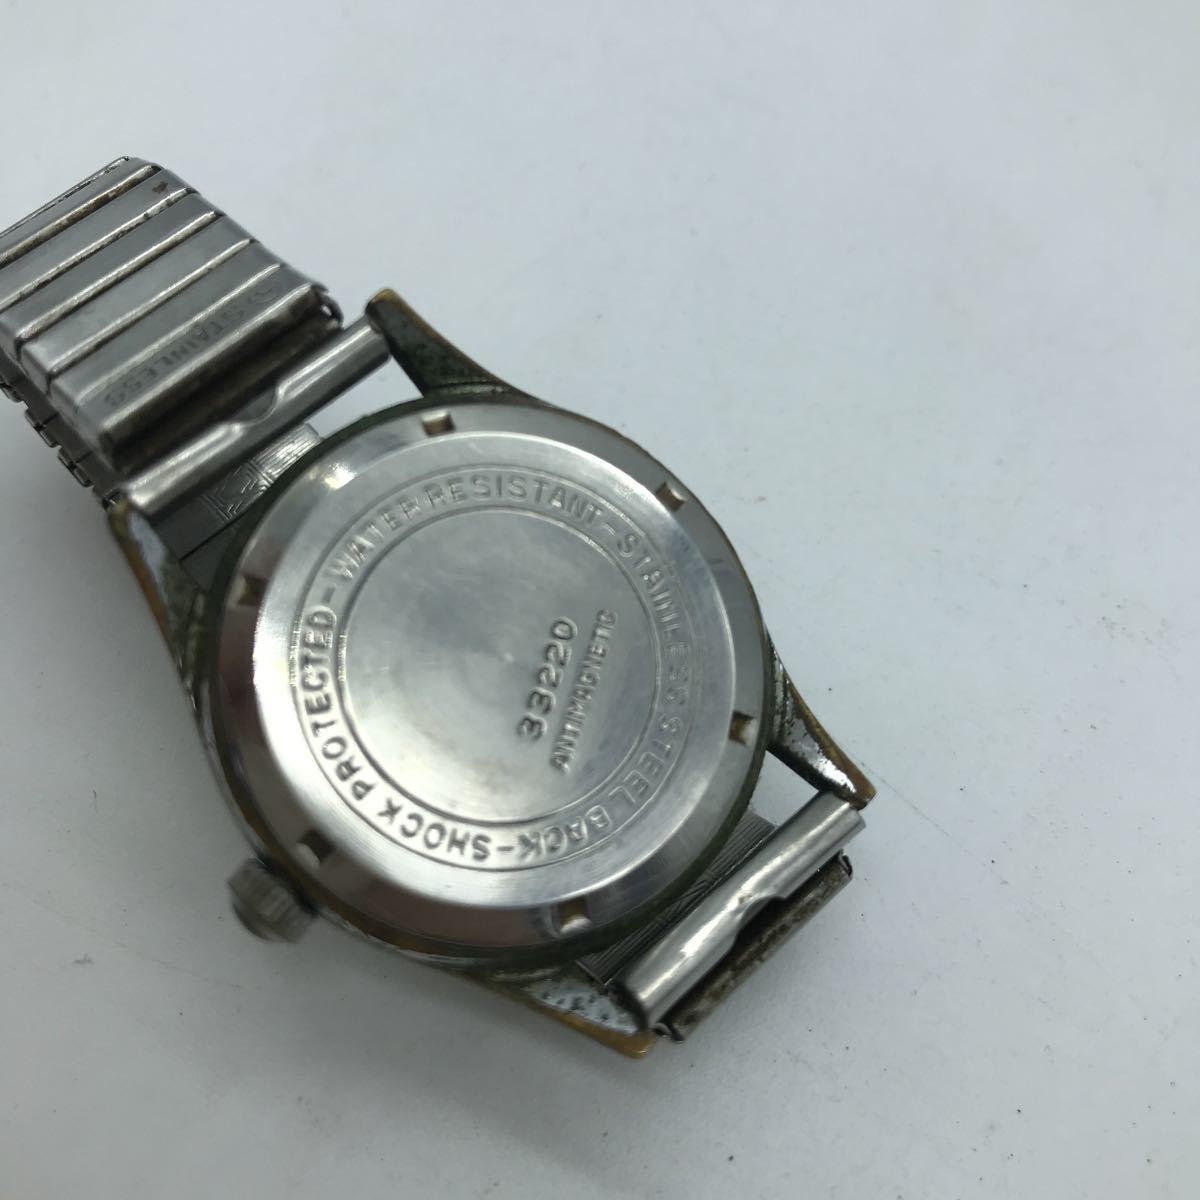 MONI wristwatch 17 stone ANTIMAGNETIC hand winding Vintage immovable JUNK goods antique 